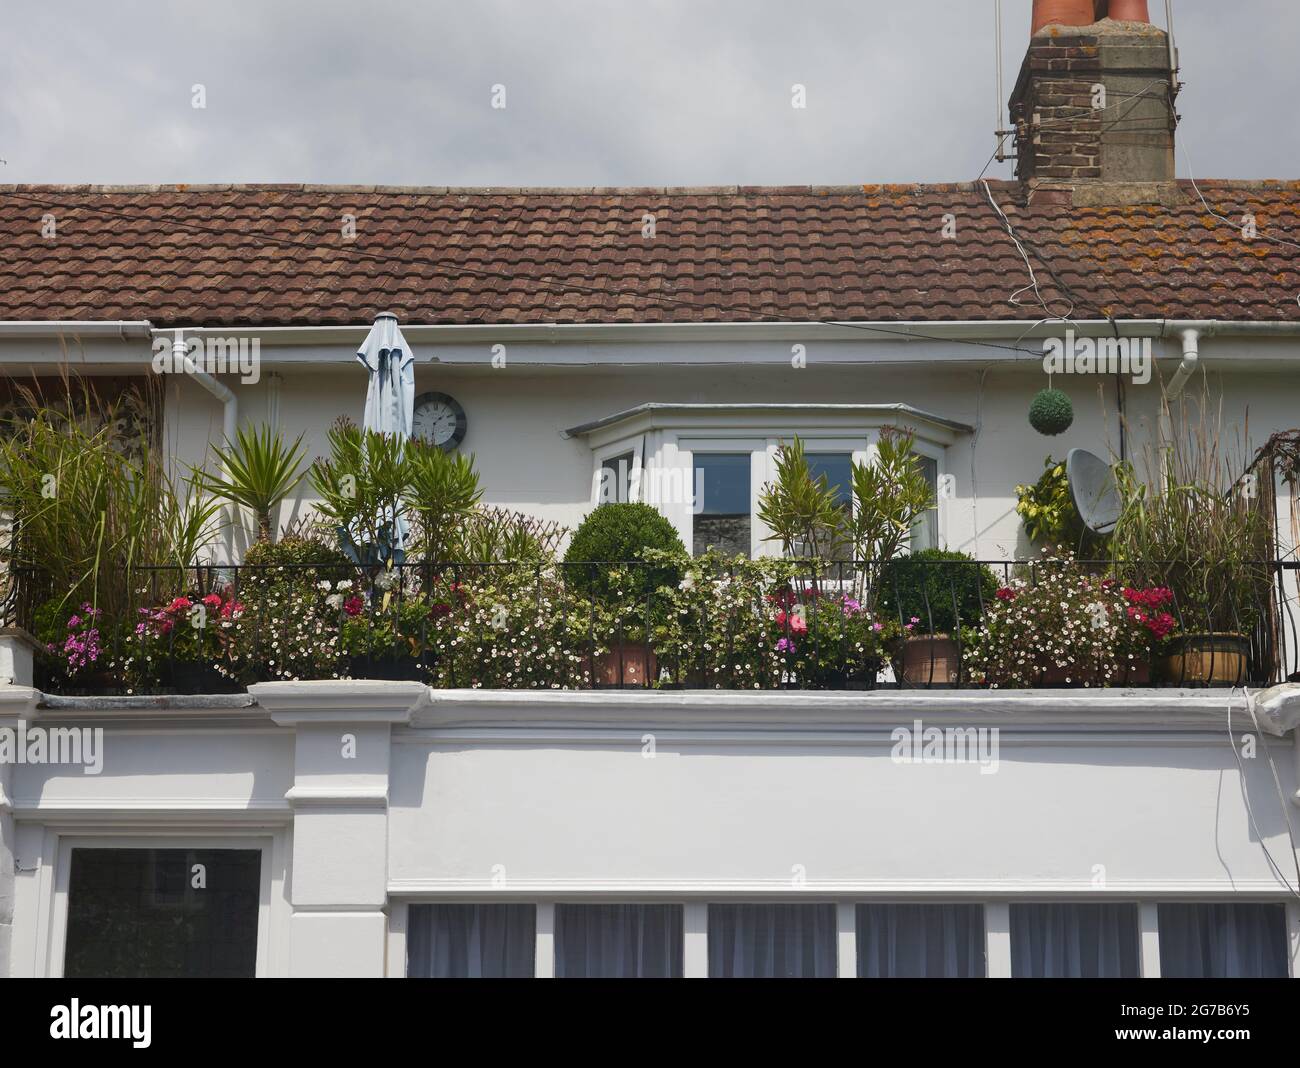 Roof terrace on the topfloor of a house in England, UK, seen planted with garden plants in summer 2021. Stock Photo